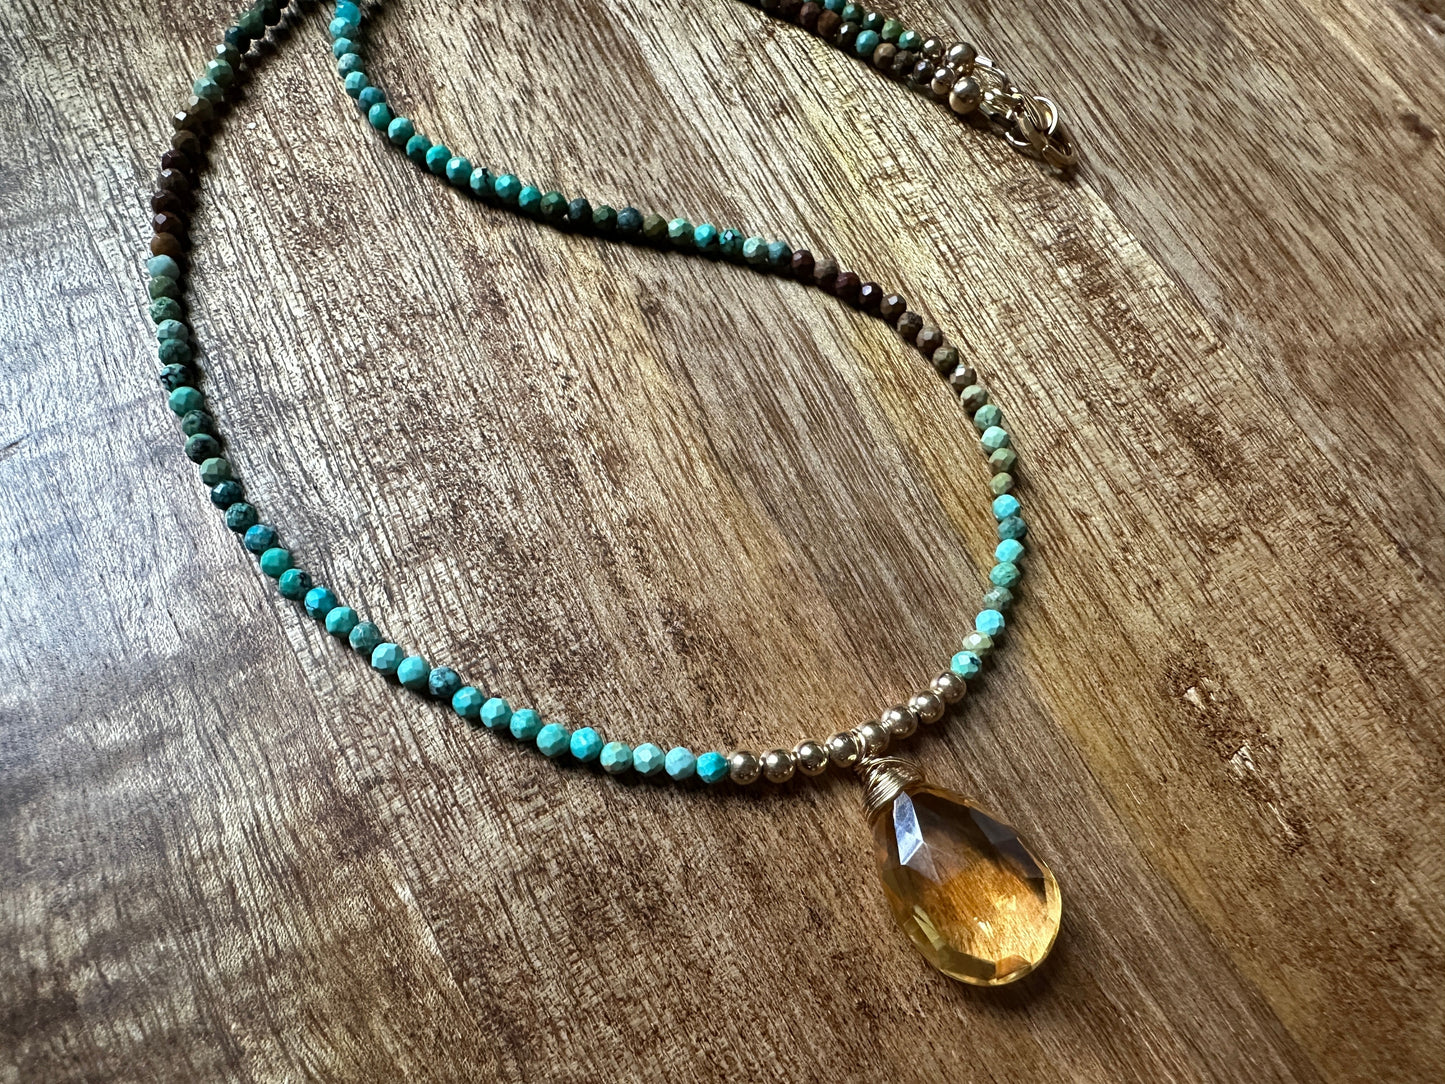 14kt Gold Filled Dainty Turquoise and Citrine Necklace